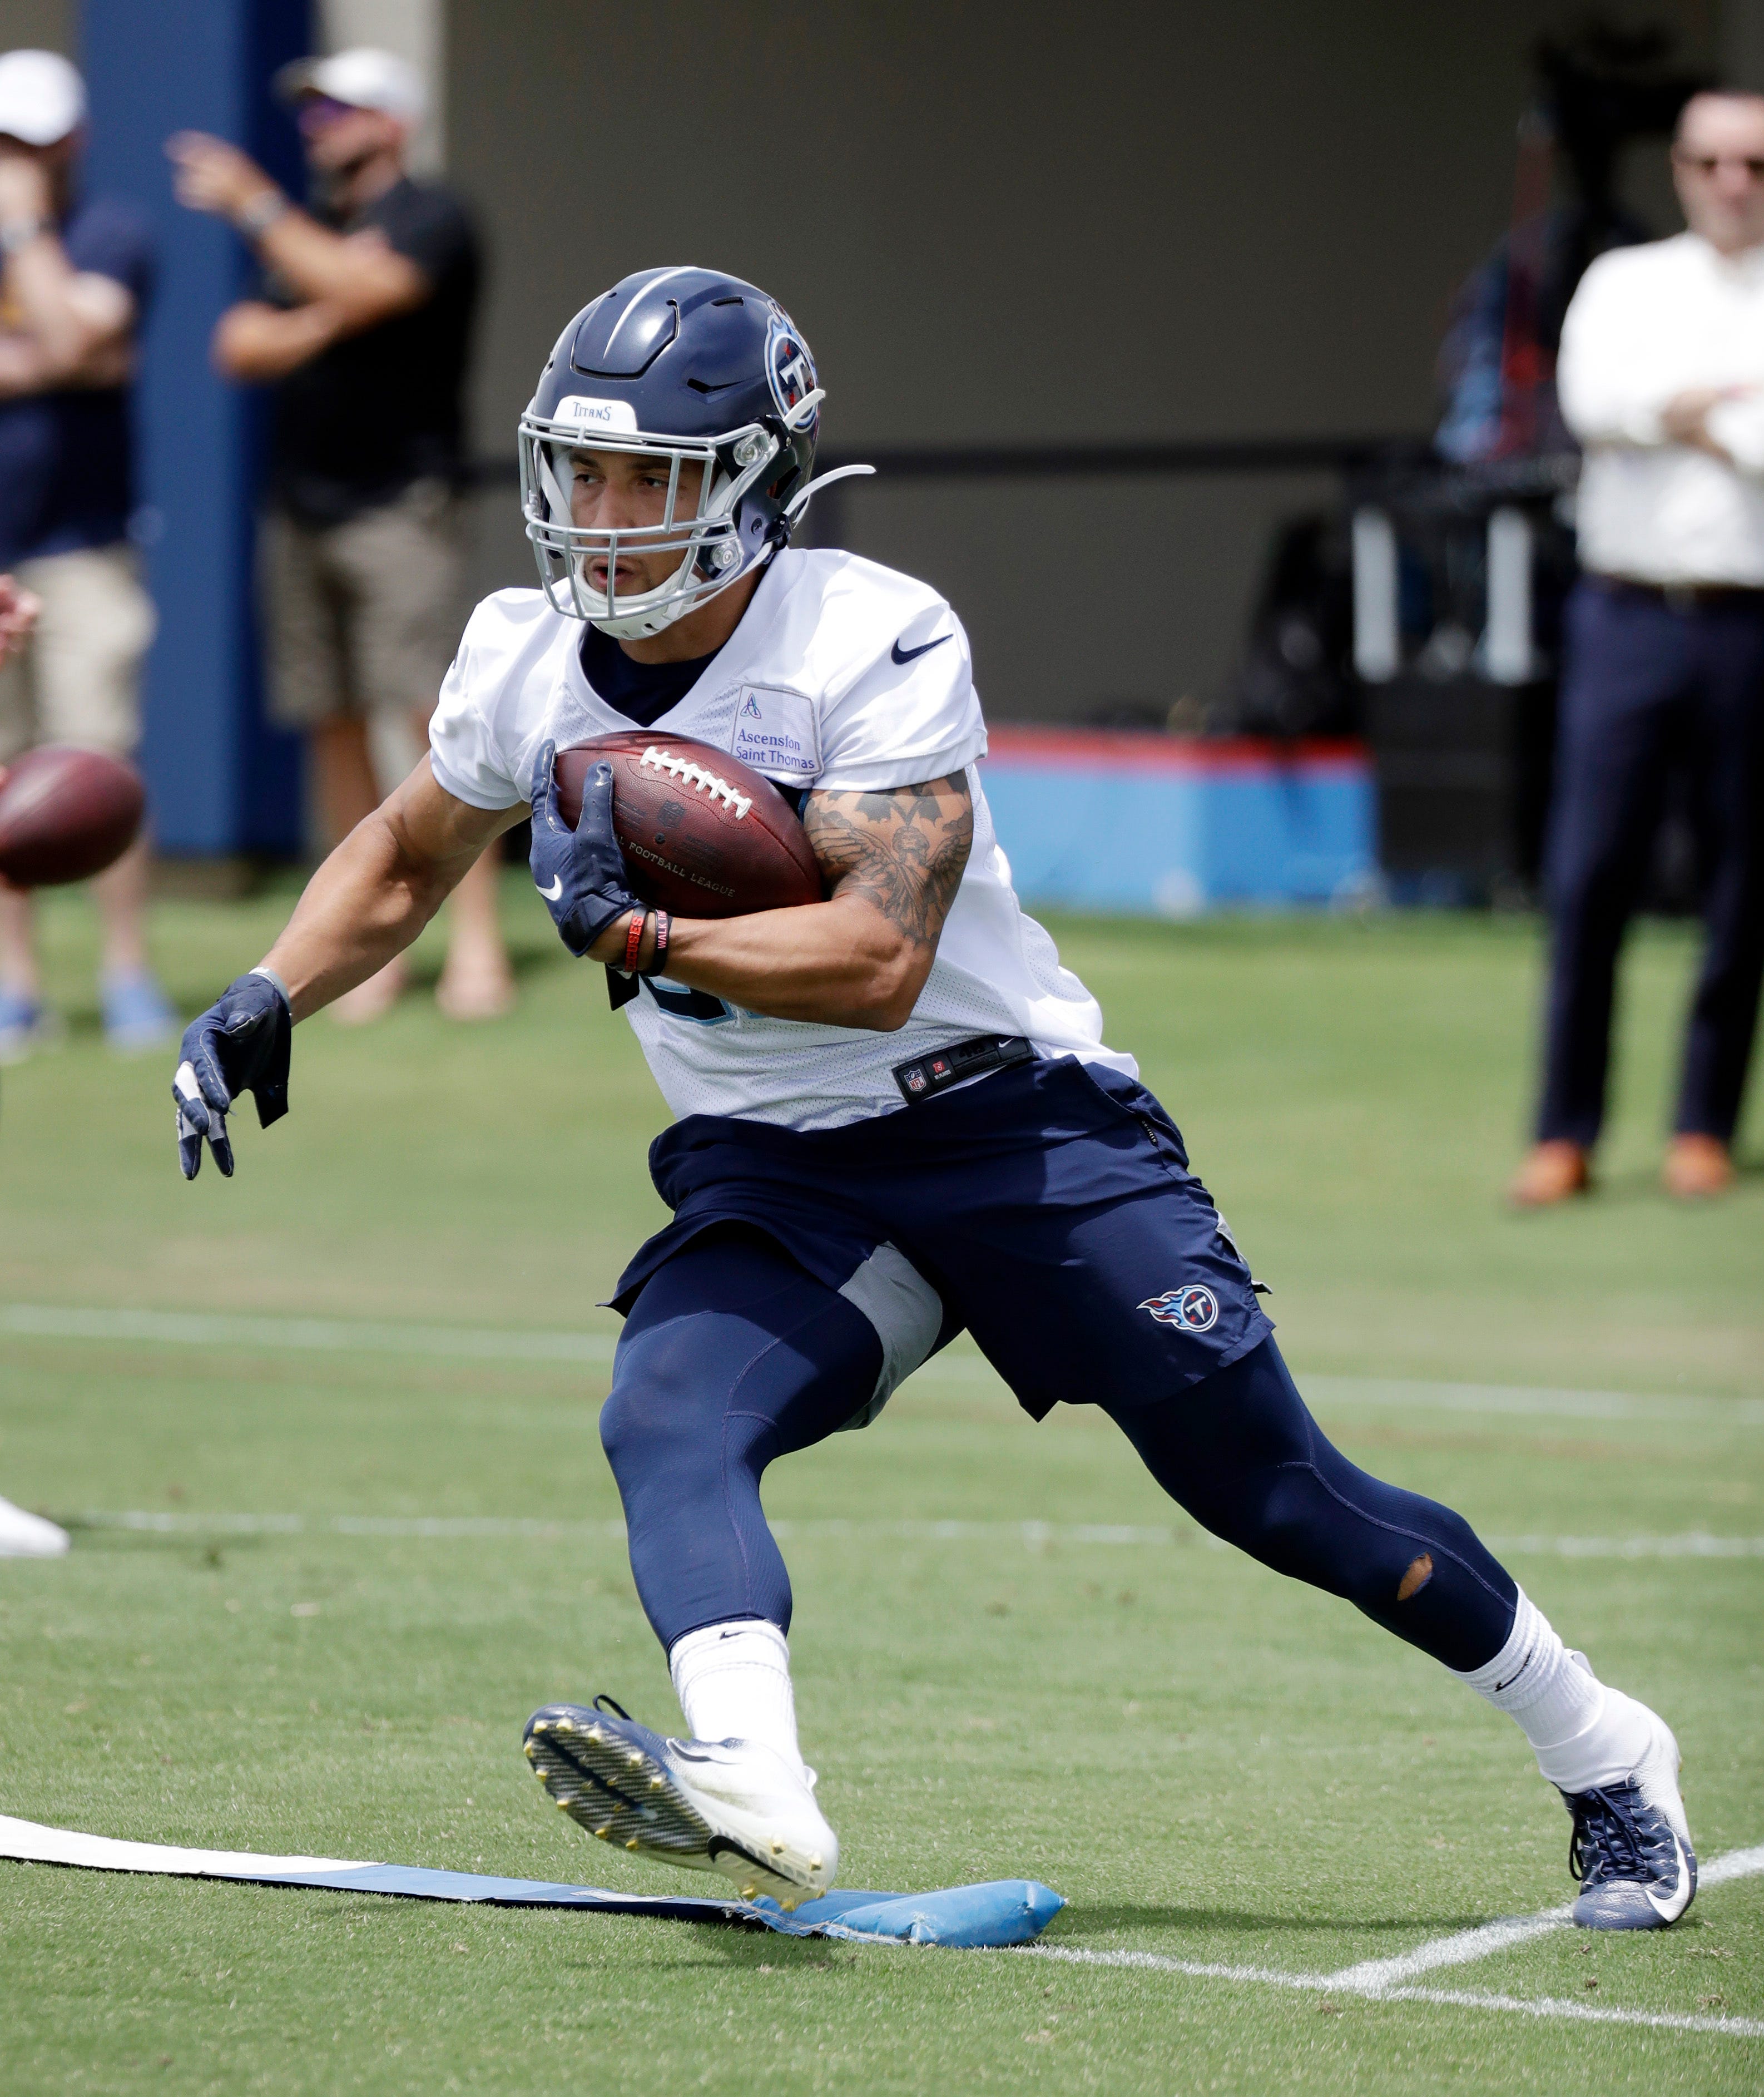 Titans: 3 newcomers bubble for roster spot